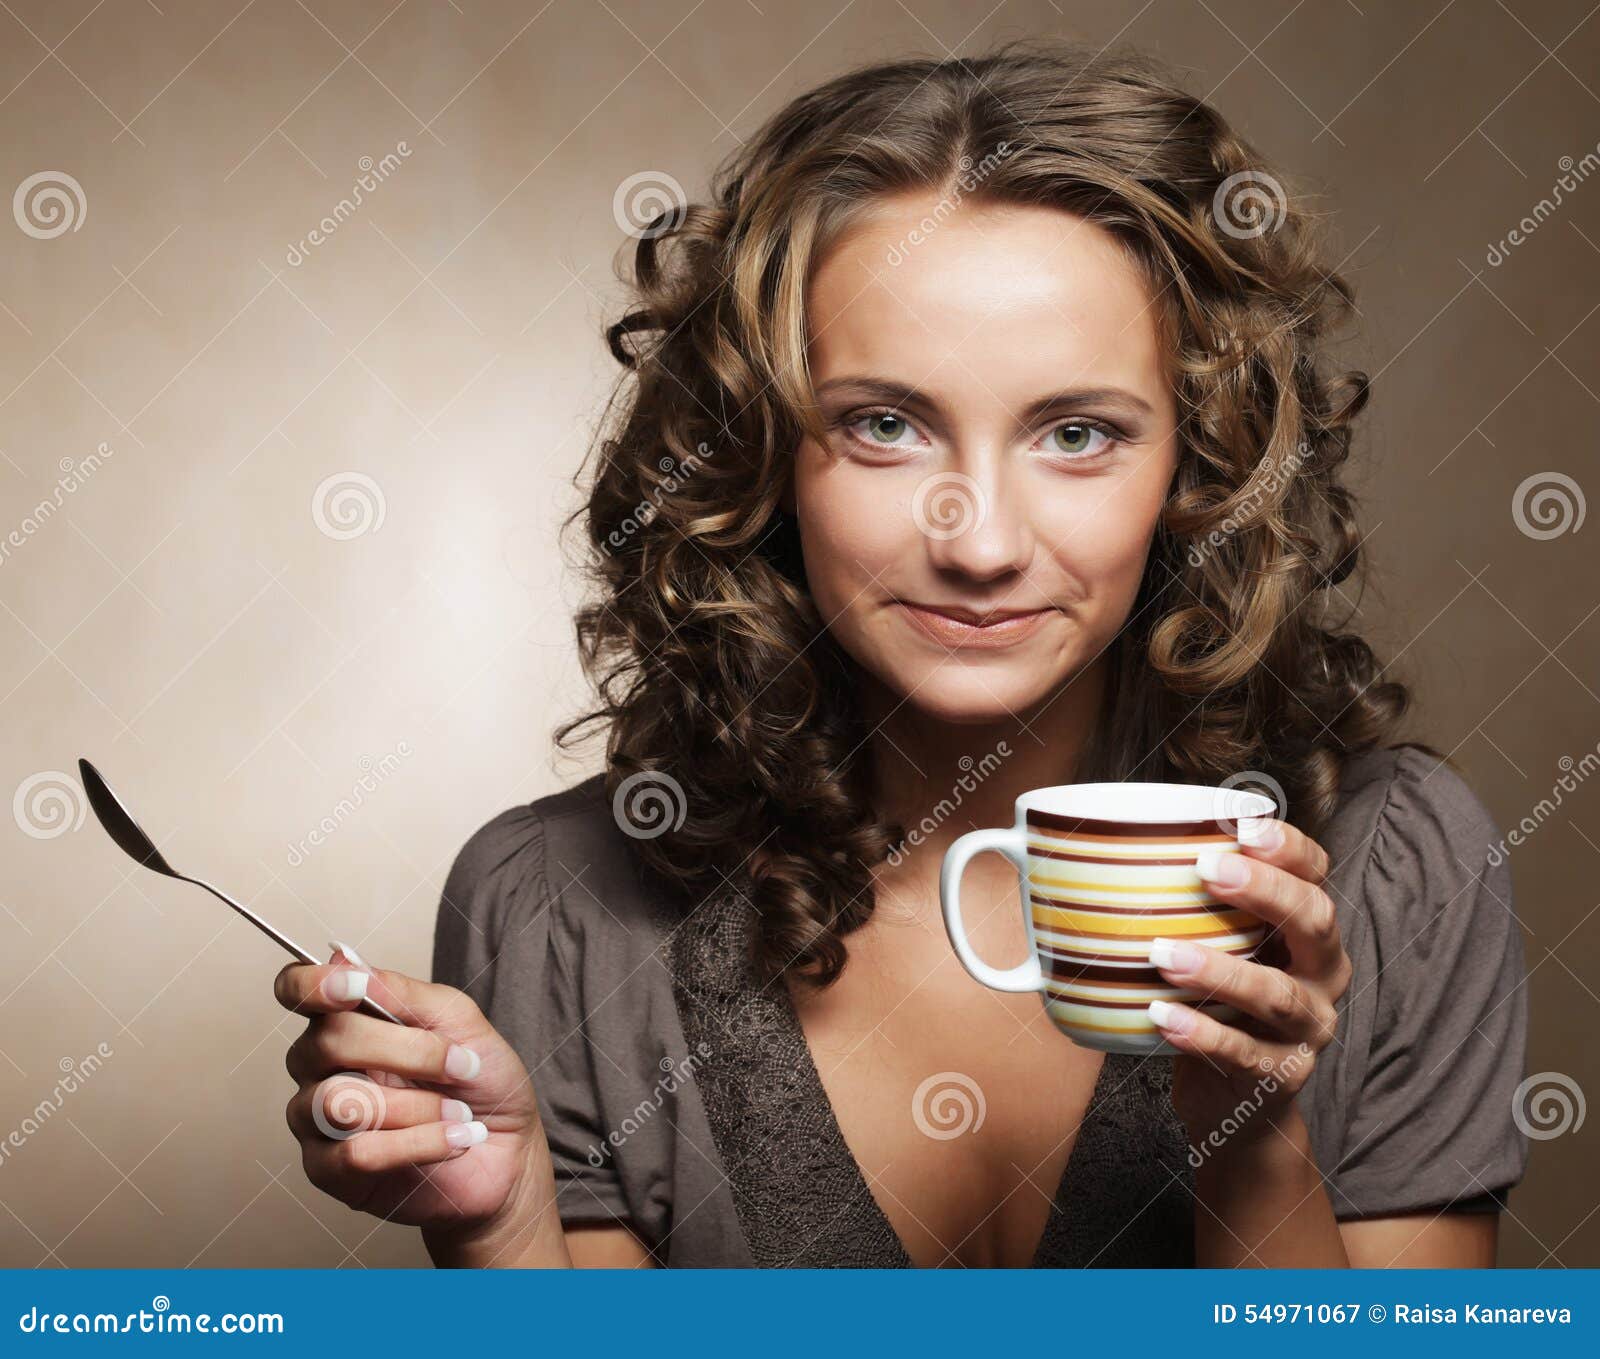 Pretty Woman Drinking Coffee Stock Image Image Of Adult Cookie 54971067